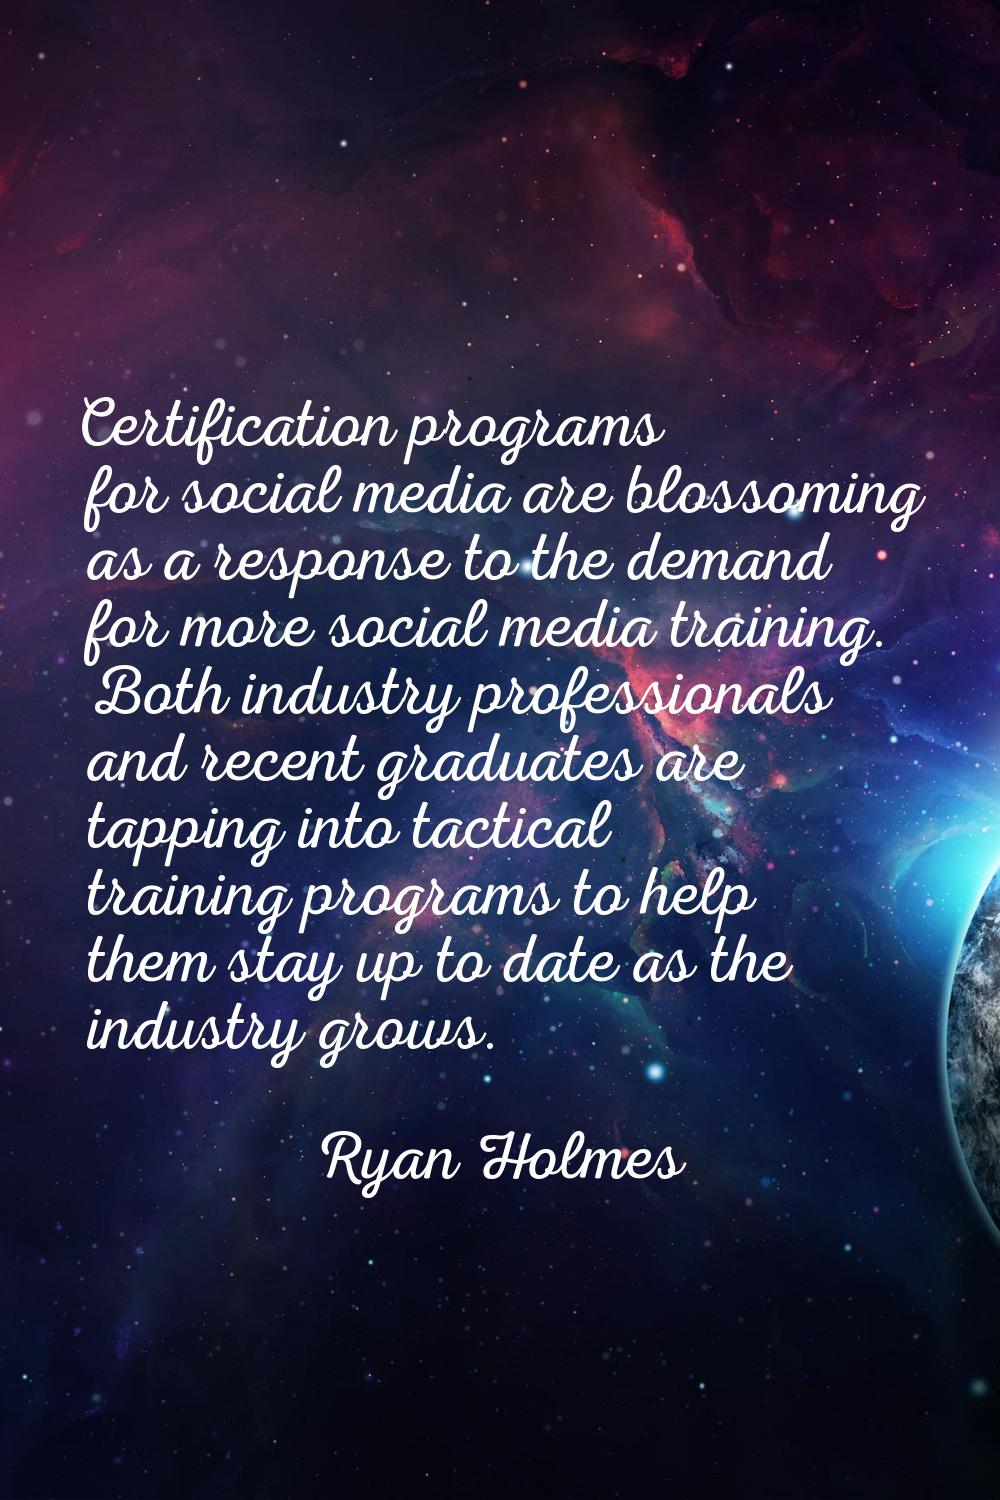 Certification programs for social media are blossoming as a response to the demand for more social 